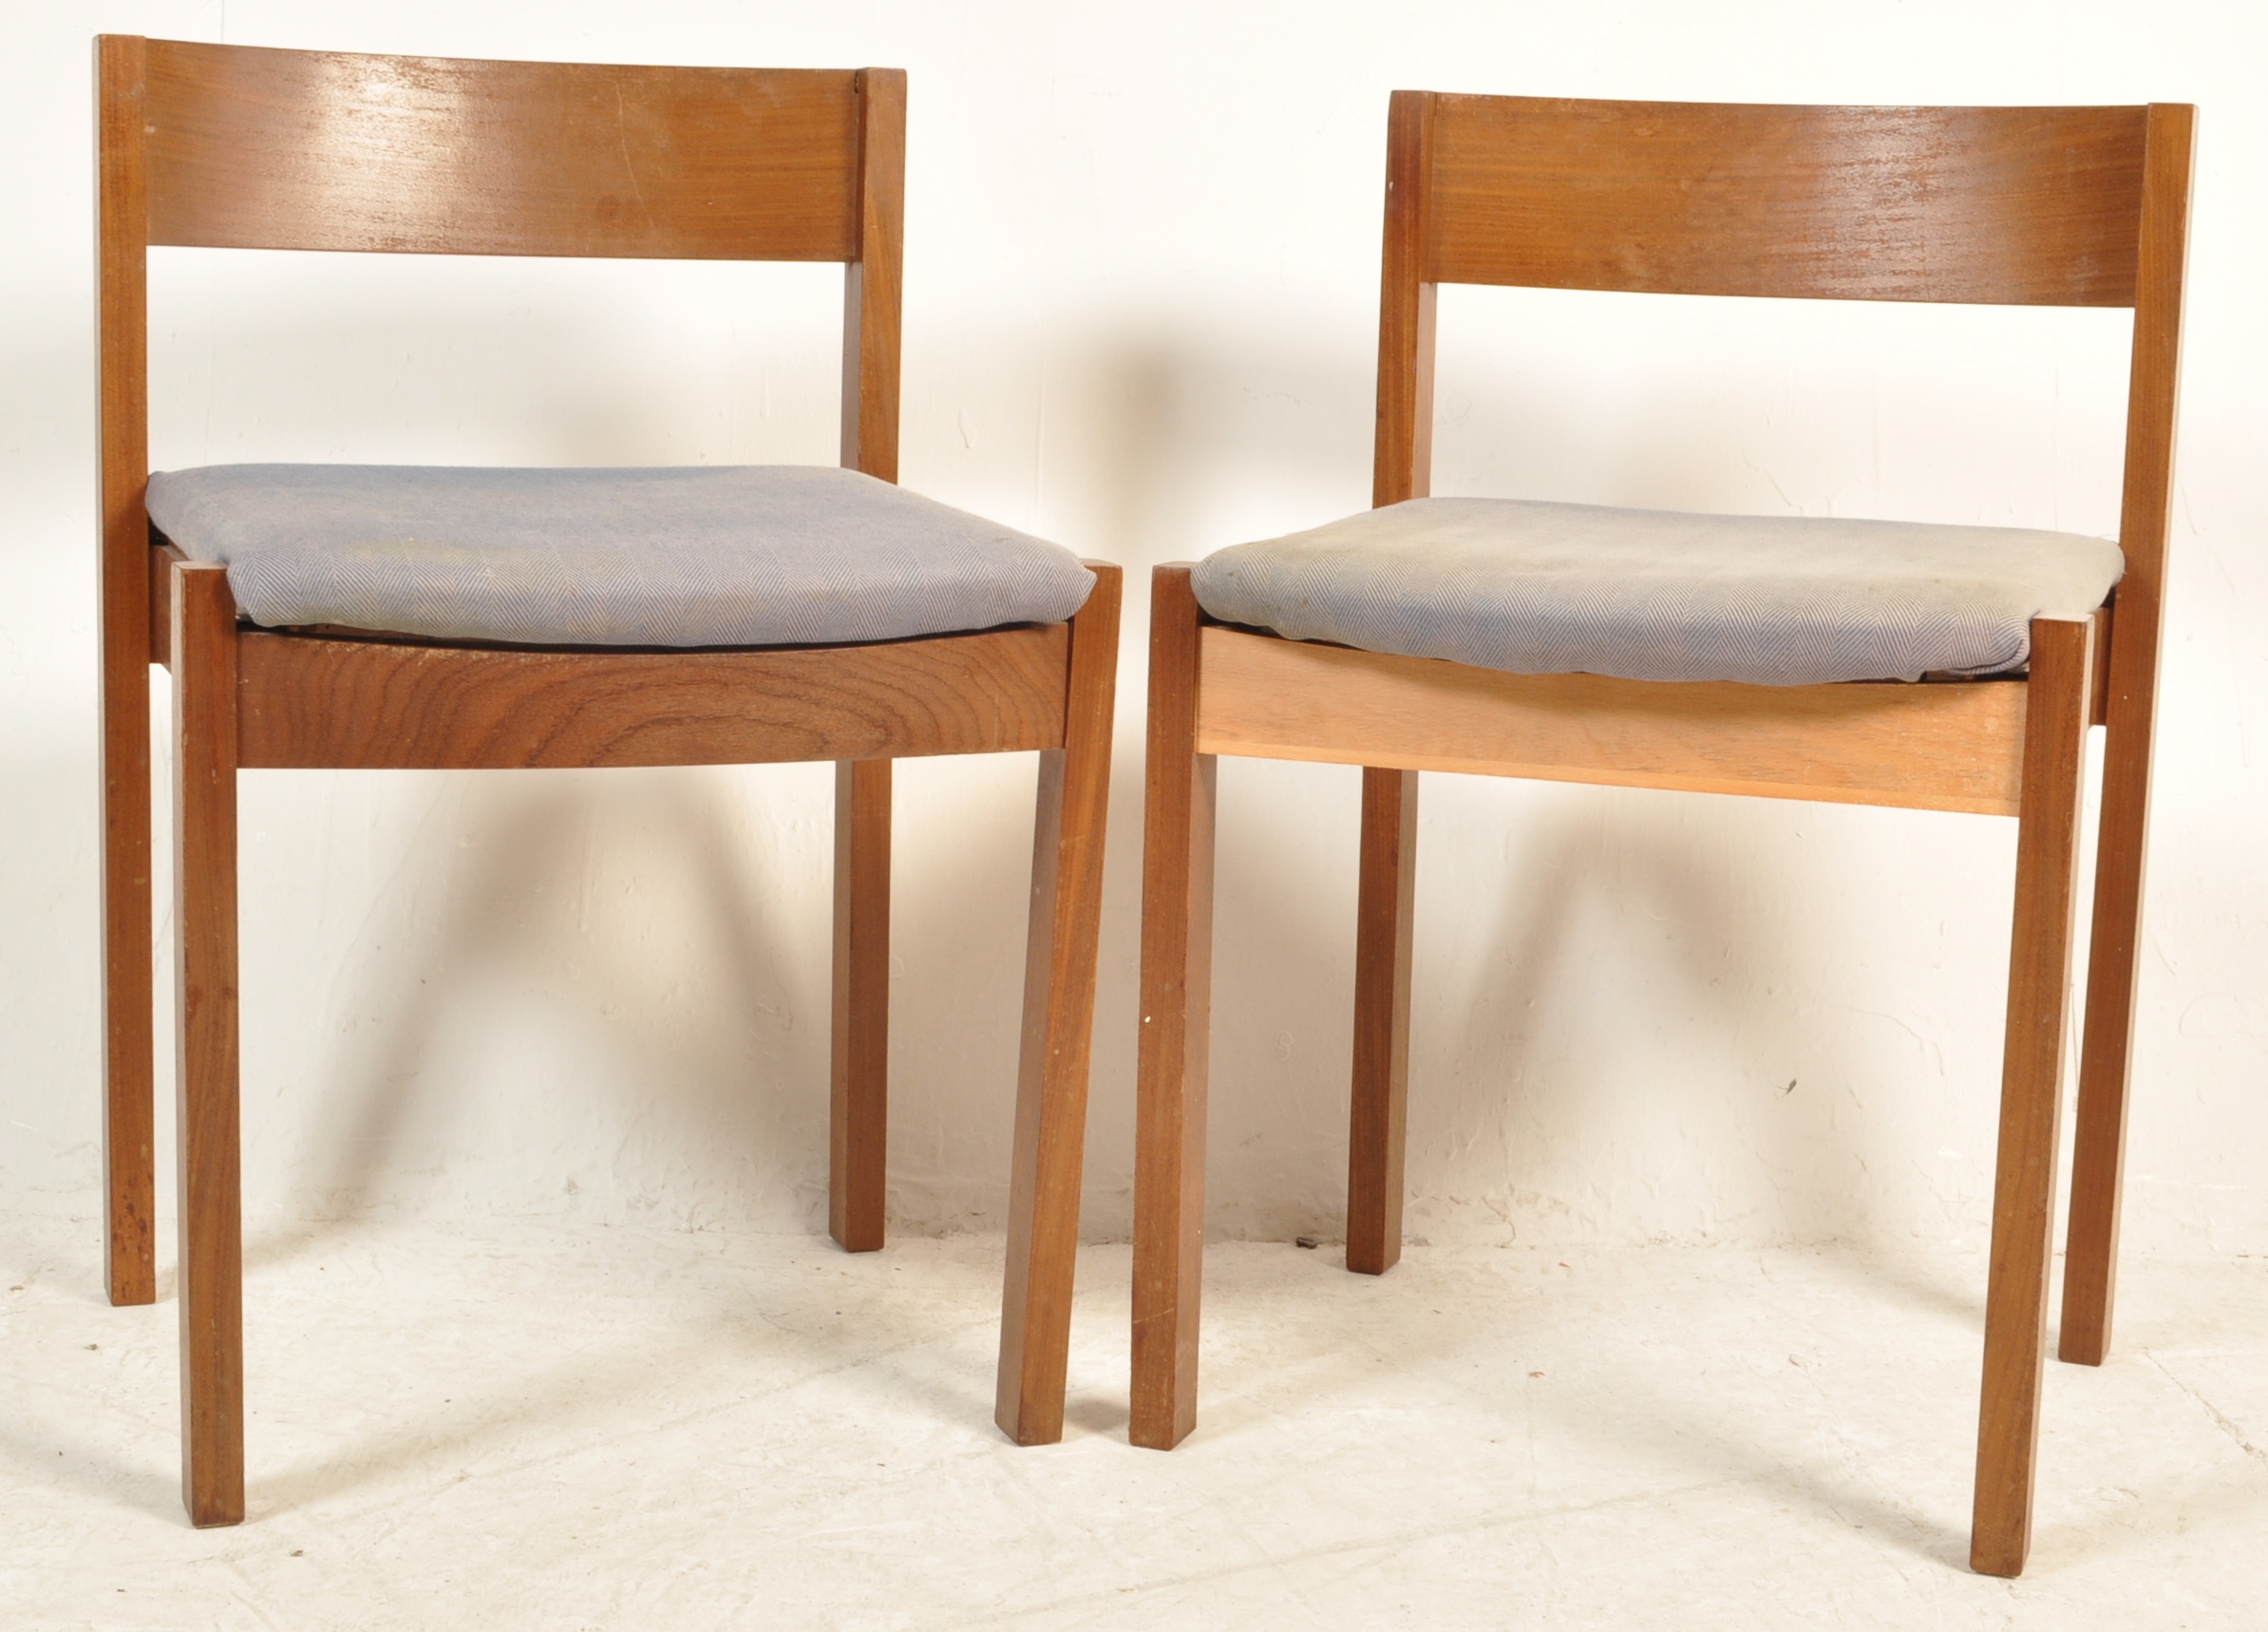 MEREDEW - BRITISH MODERN DESIGN - RETRO VINTAGE TABLE AND CHAIRS - Image 6 of 8